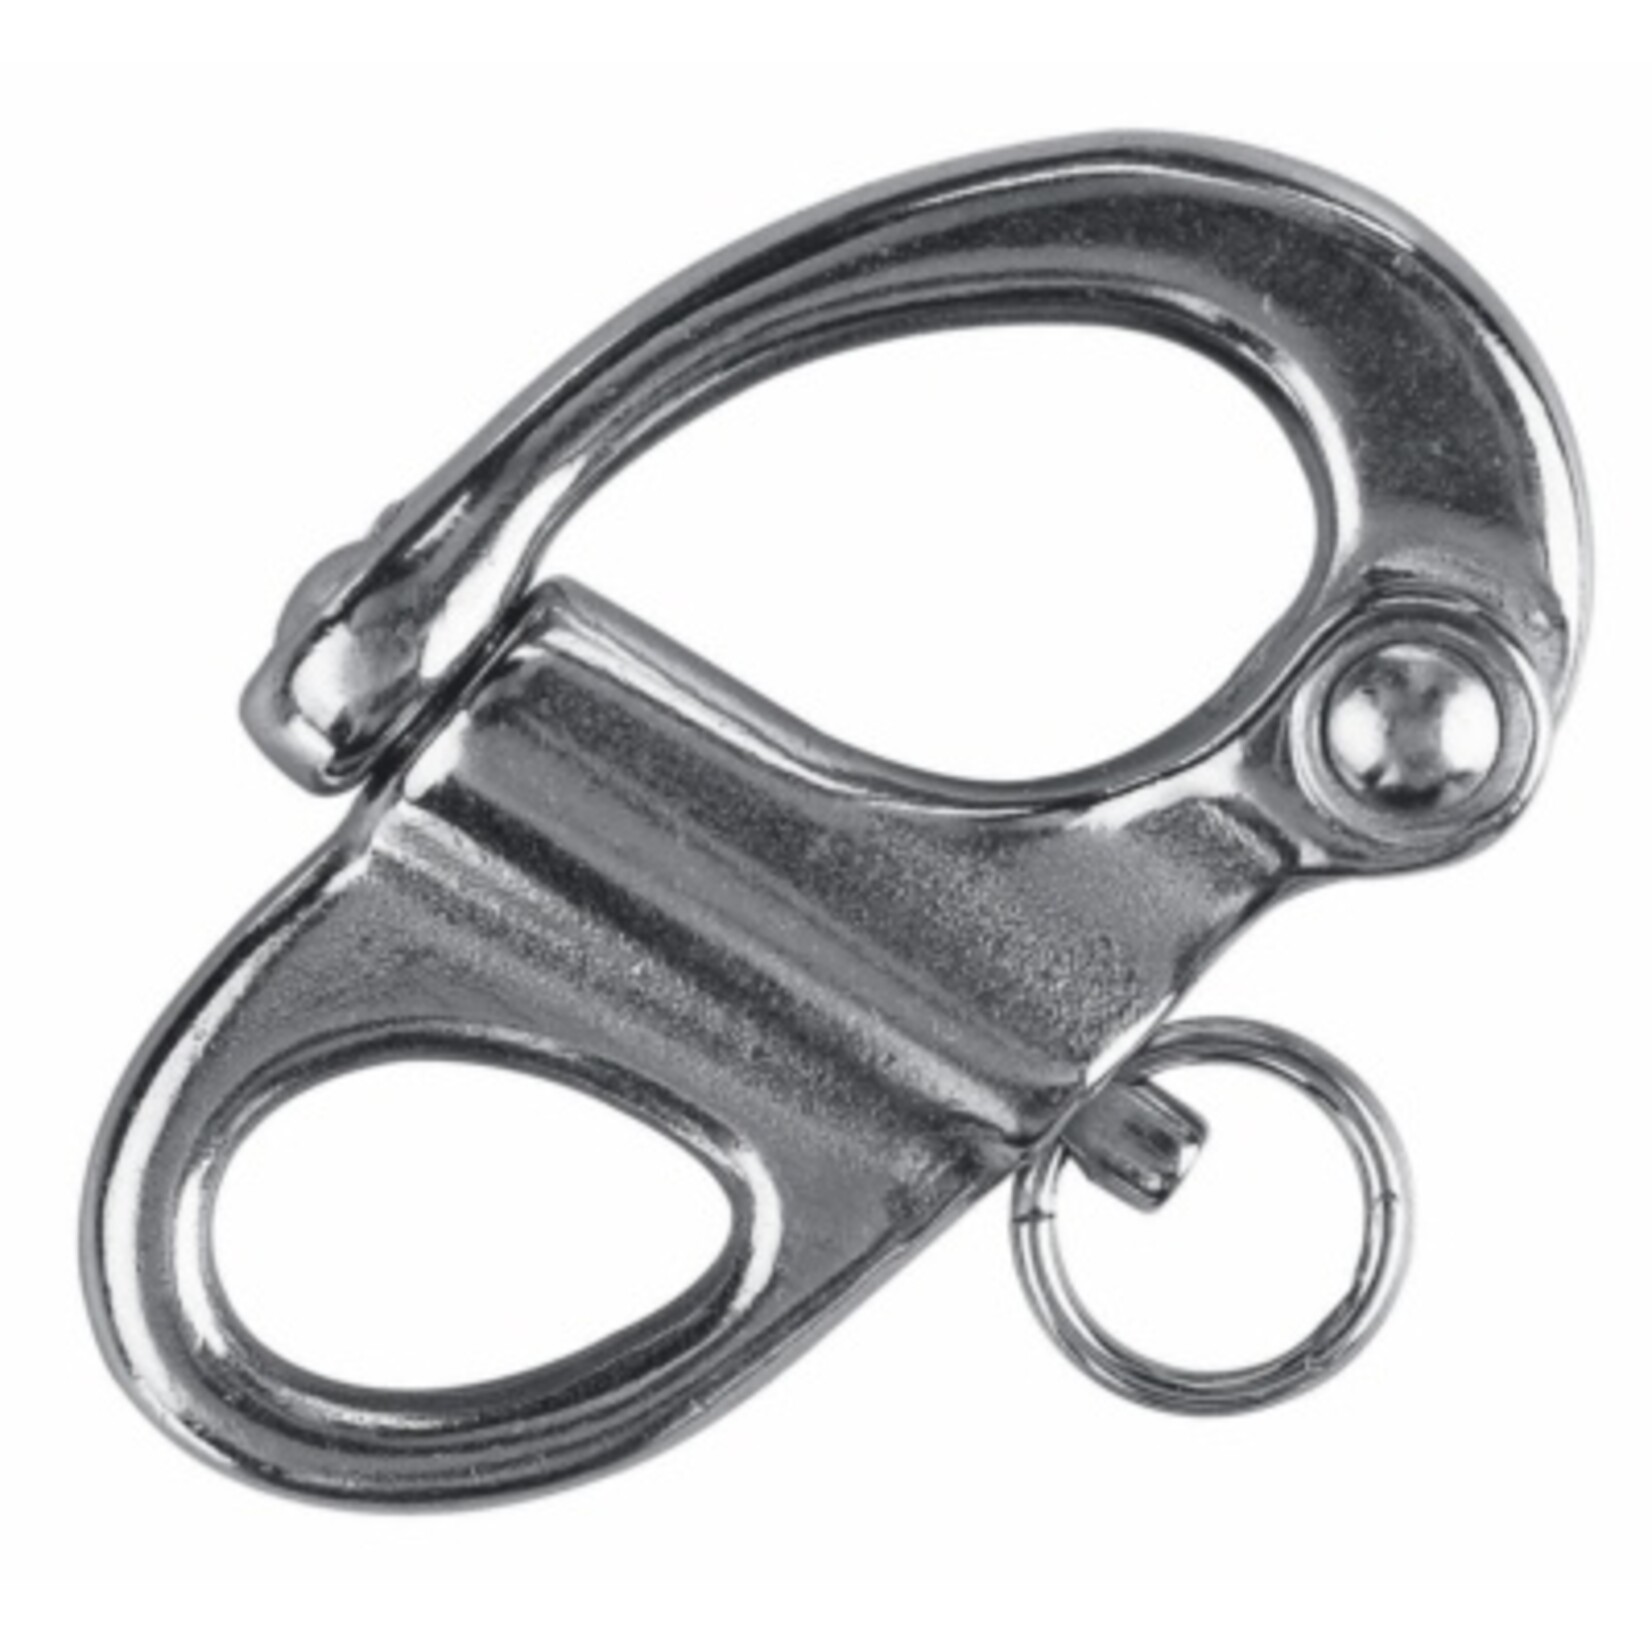 Plastimo Snap shackle s/s with fixed eye 50mm